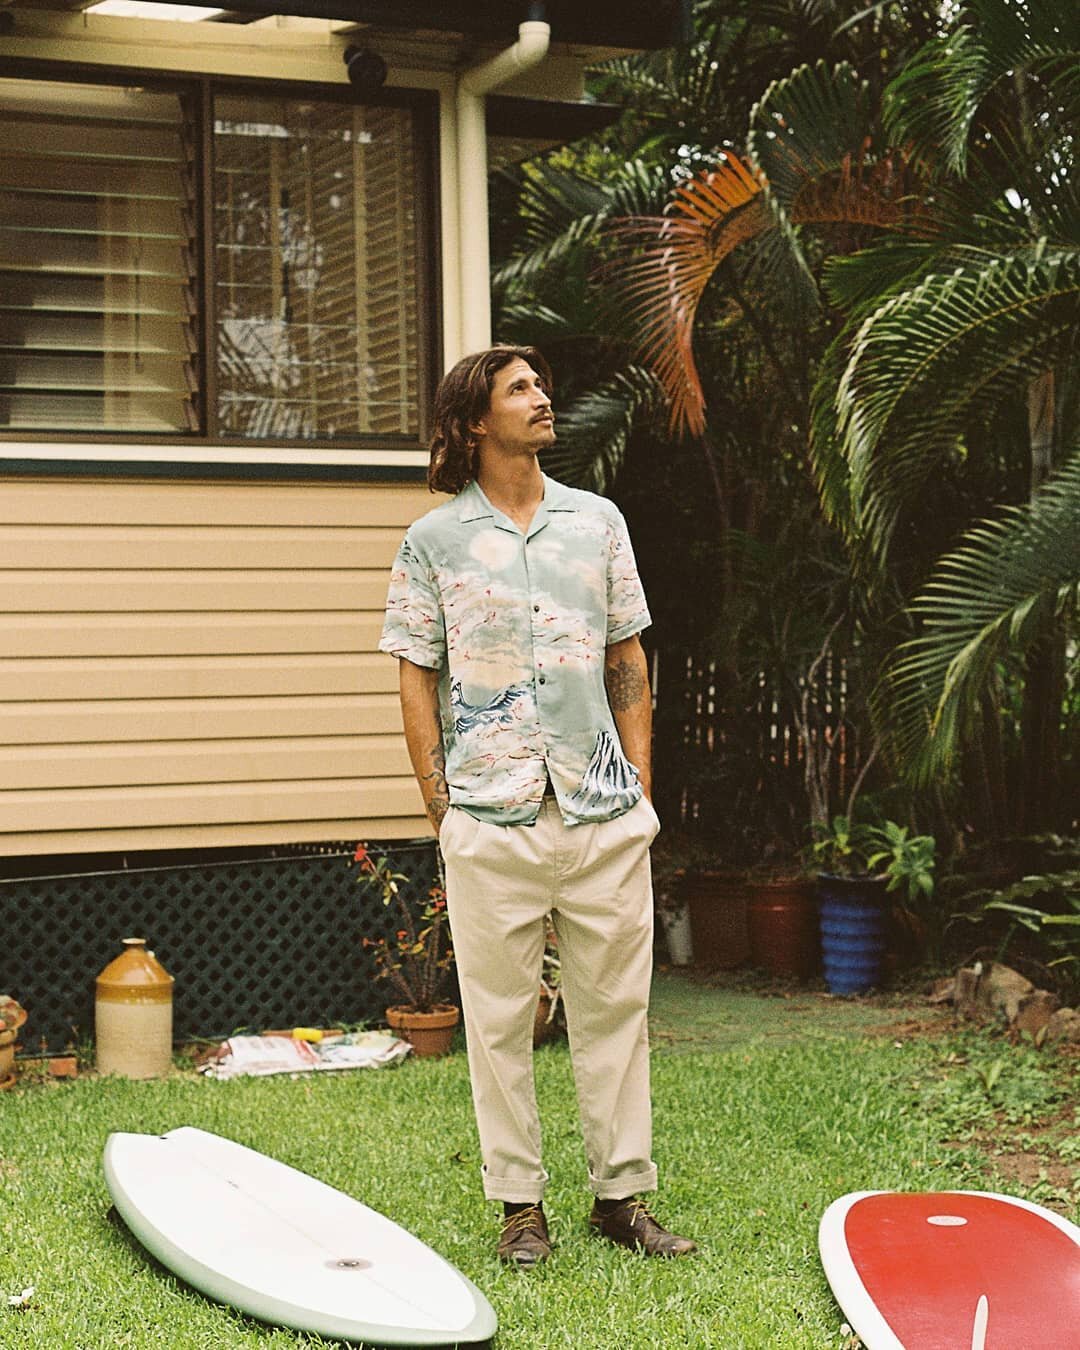 Rhythm Trade Winds Capsule

Paying homage to Japanese vintage while infusing the style of Hawaiian surf.